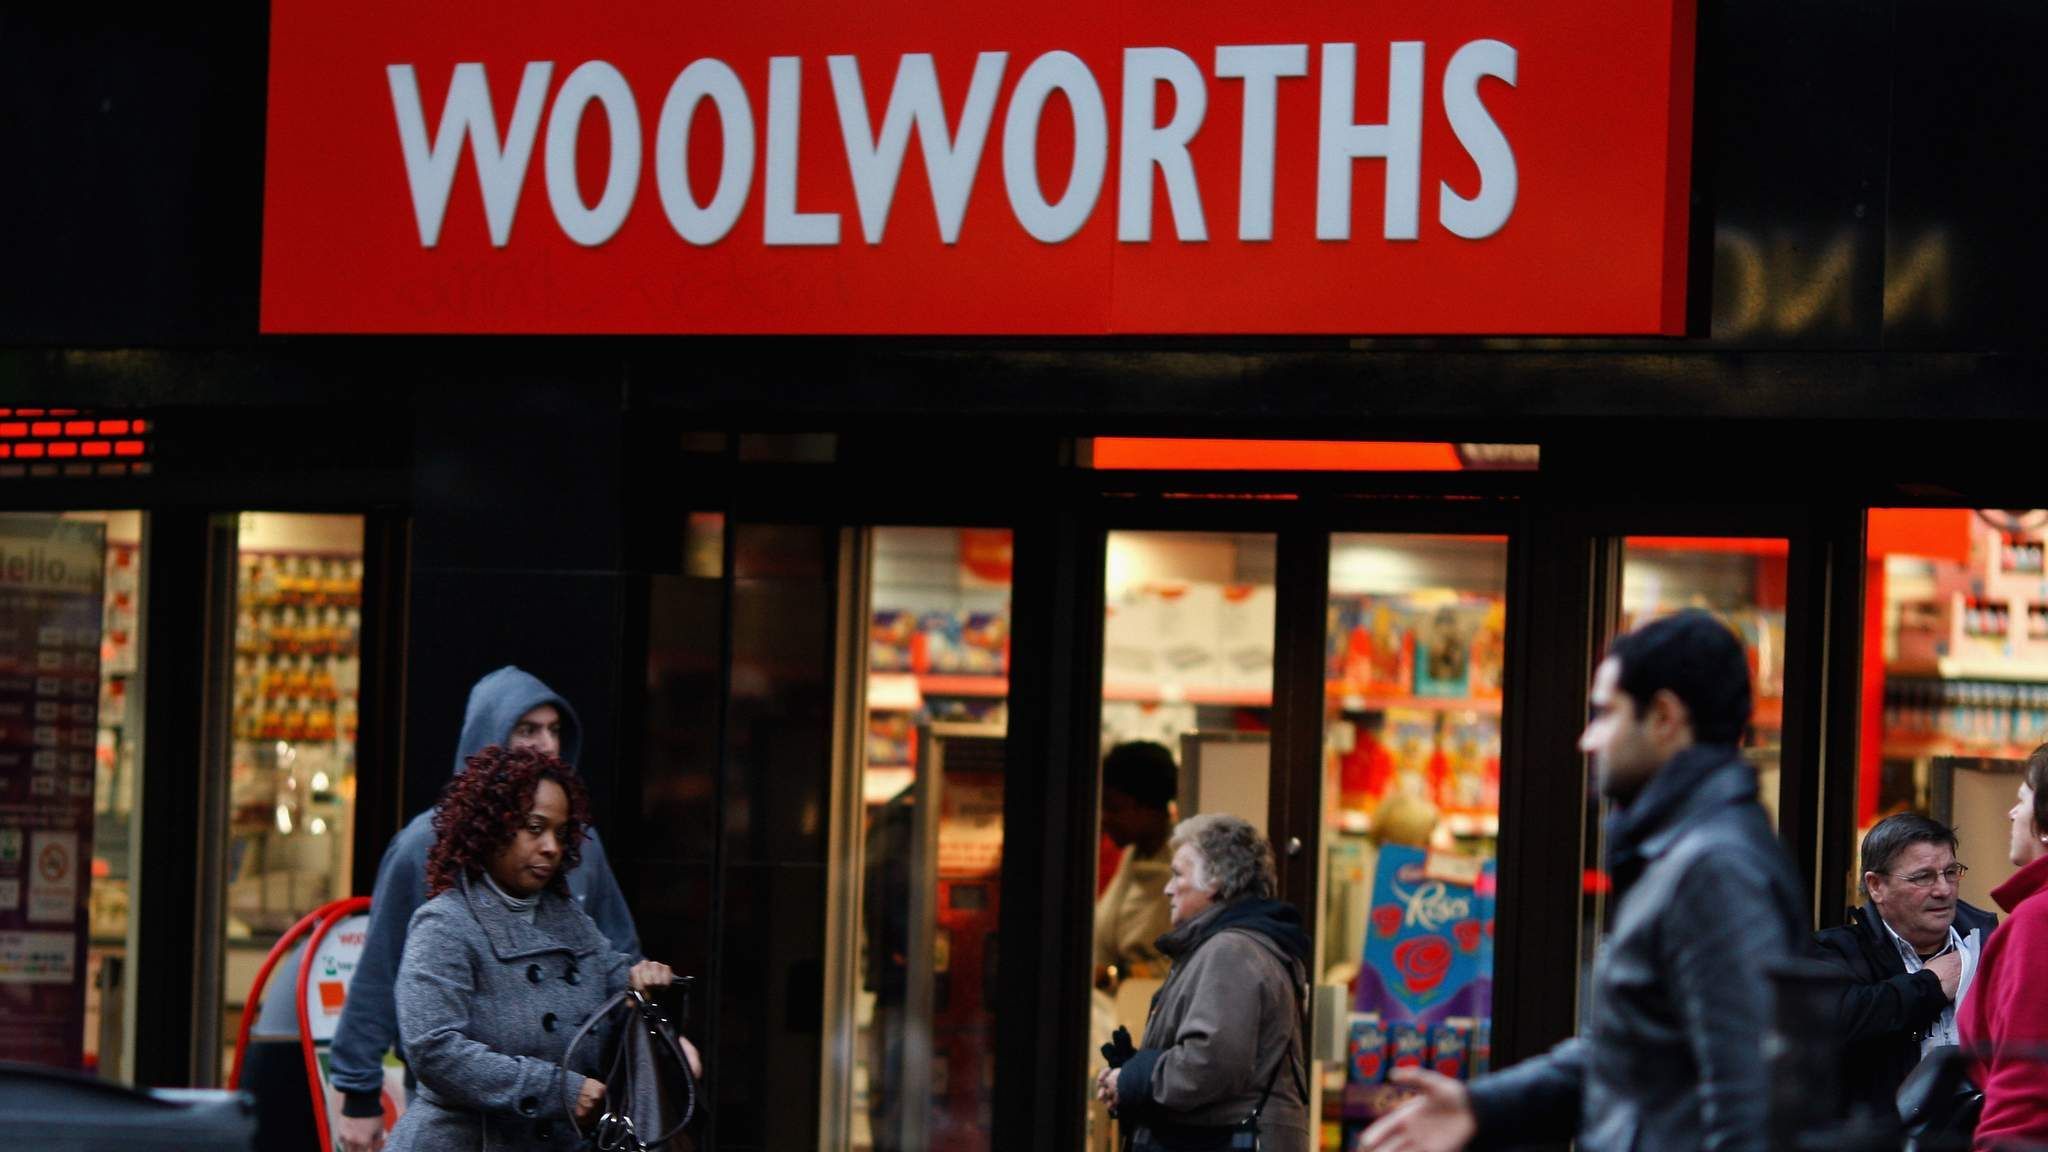 Woolworths could make shock return to the British high street